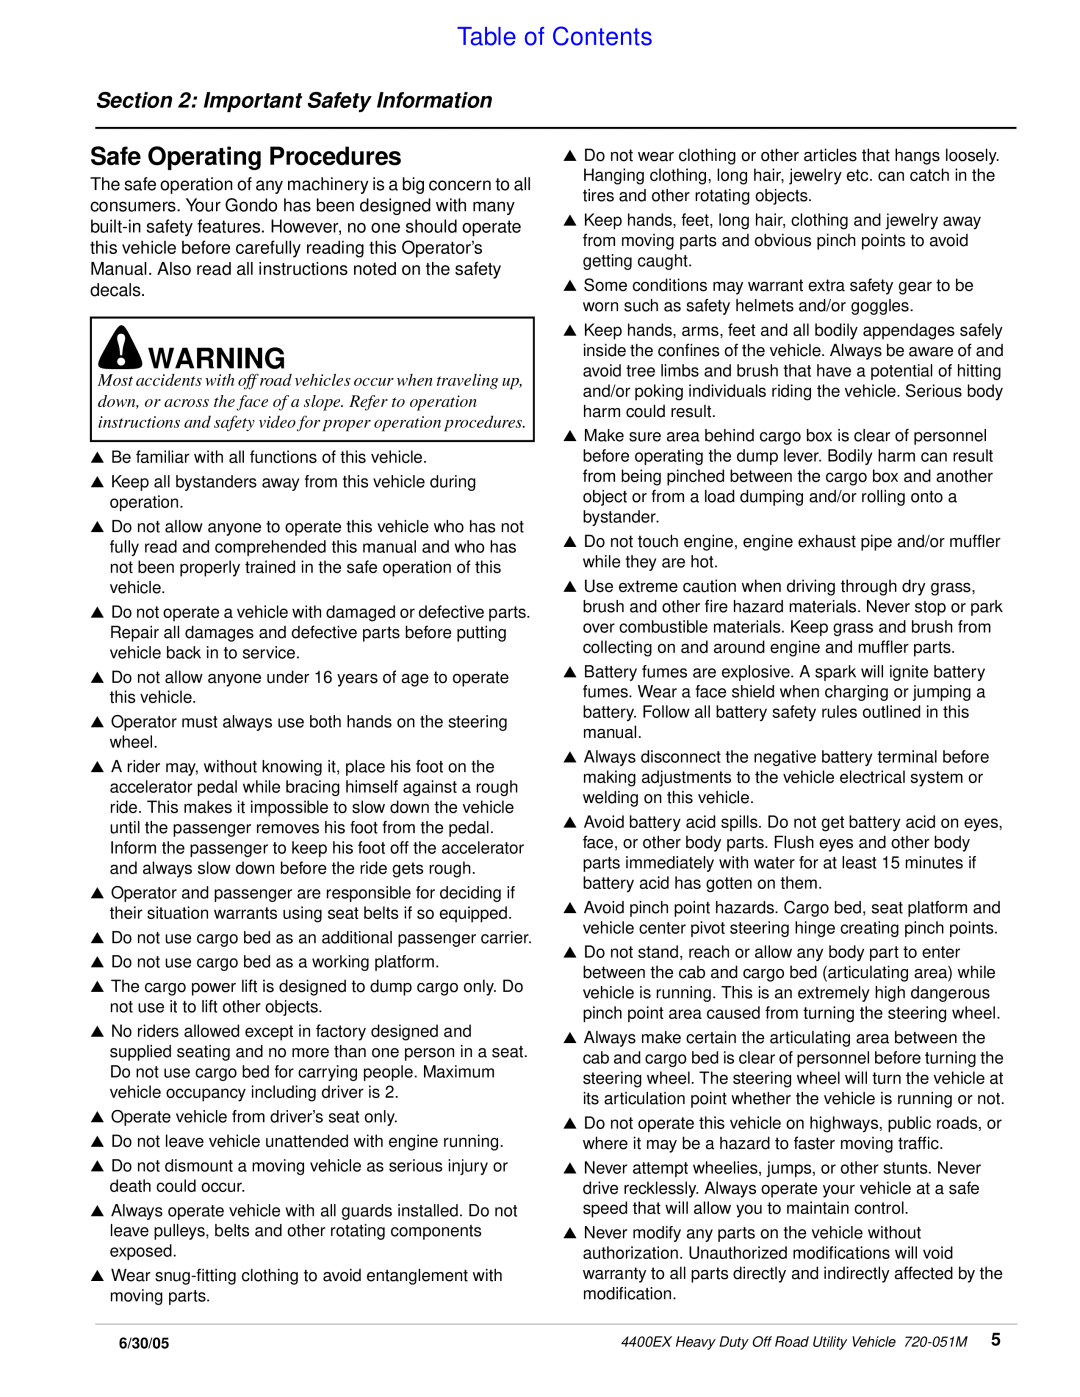 Land Pride 4400ex manual Safe Operating Procedures, Table of Contents, Important Safety Information 